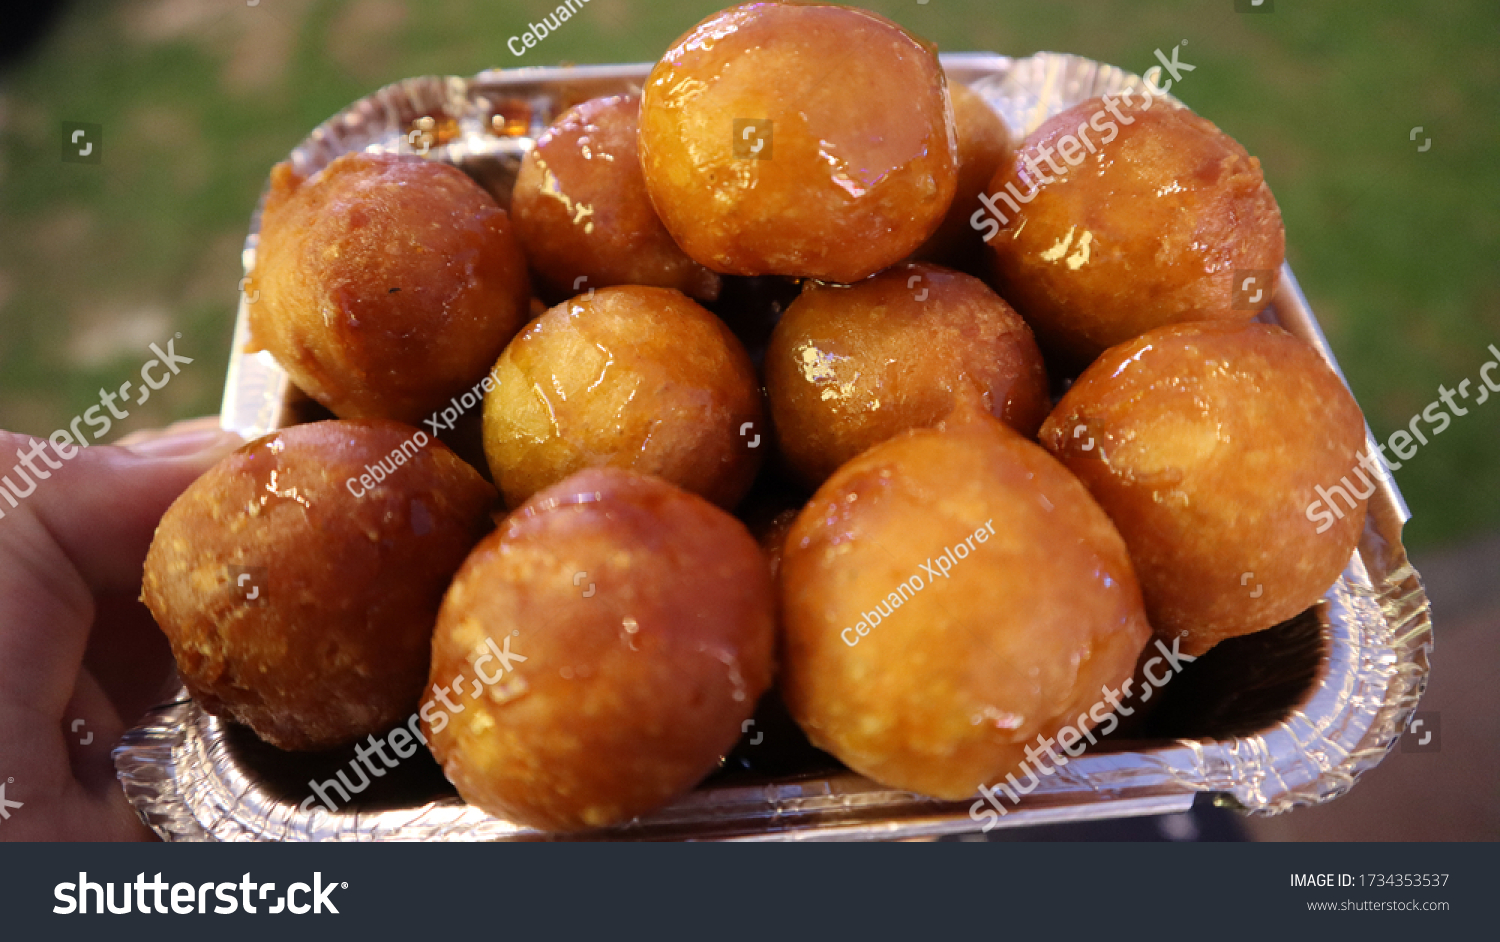 Small brown doughy balls coated with sugar syrup. This doughnut balls is famous sweets or dessert in United Arab Emirates particularly in Dubai. #1734353537